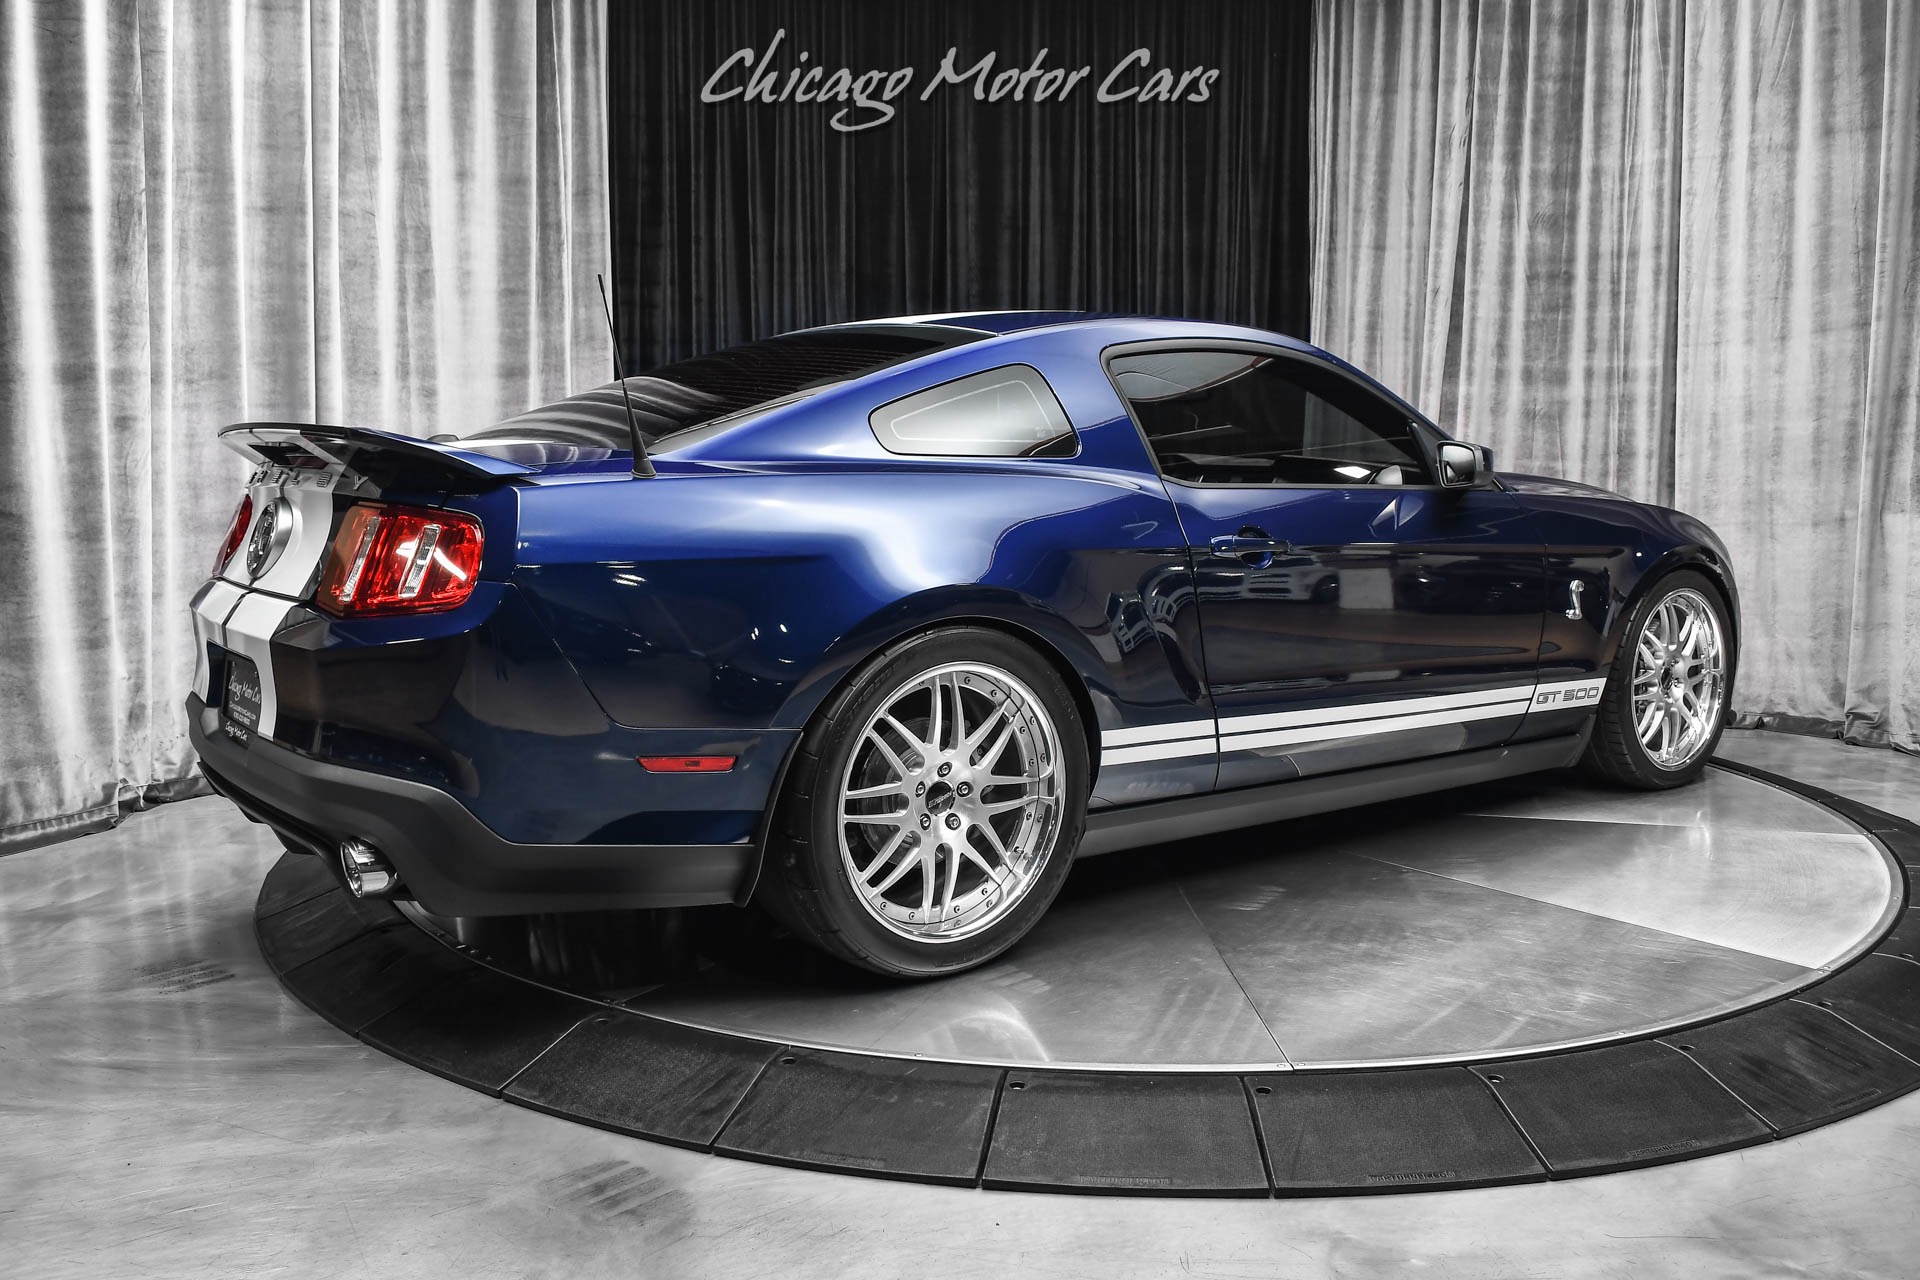 Used-2010-Ford-Mustang-Shelby-GT500-Coupe-Only-5k-Miles-Upgrades-673-RWHP